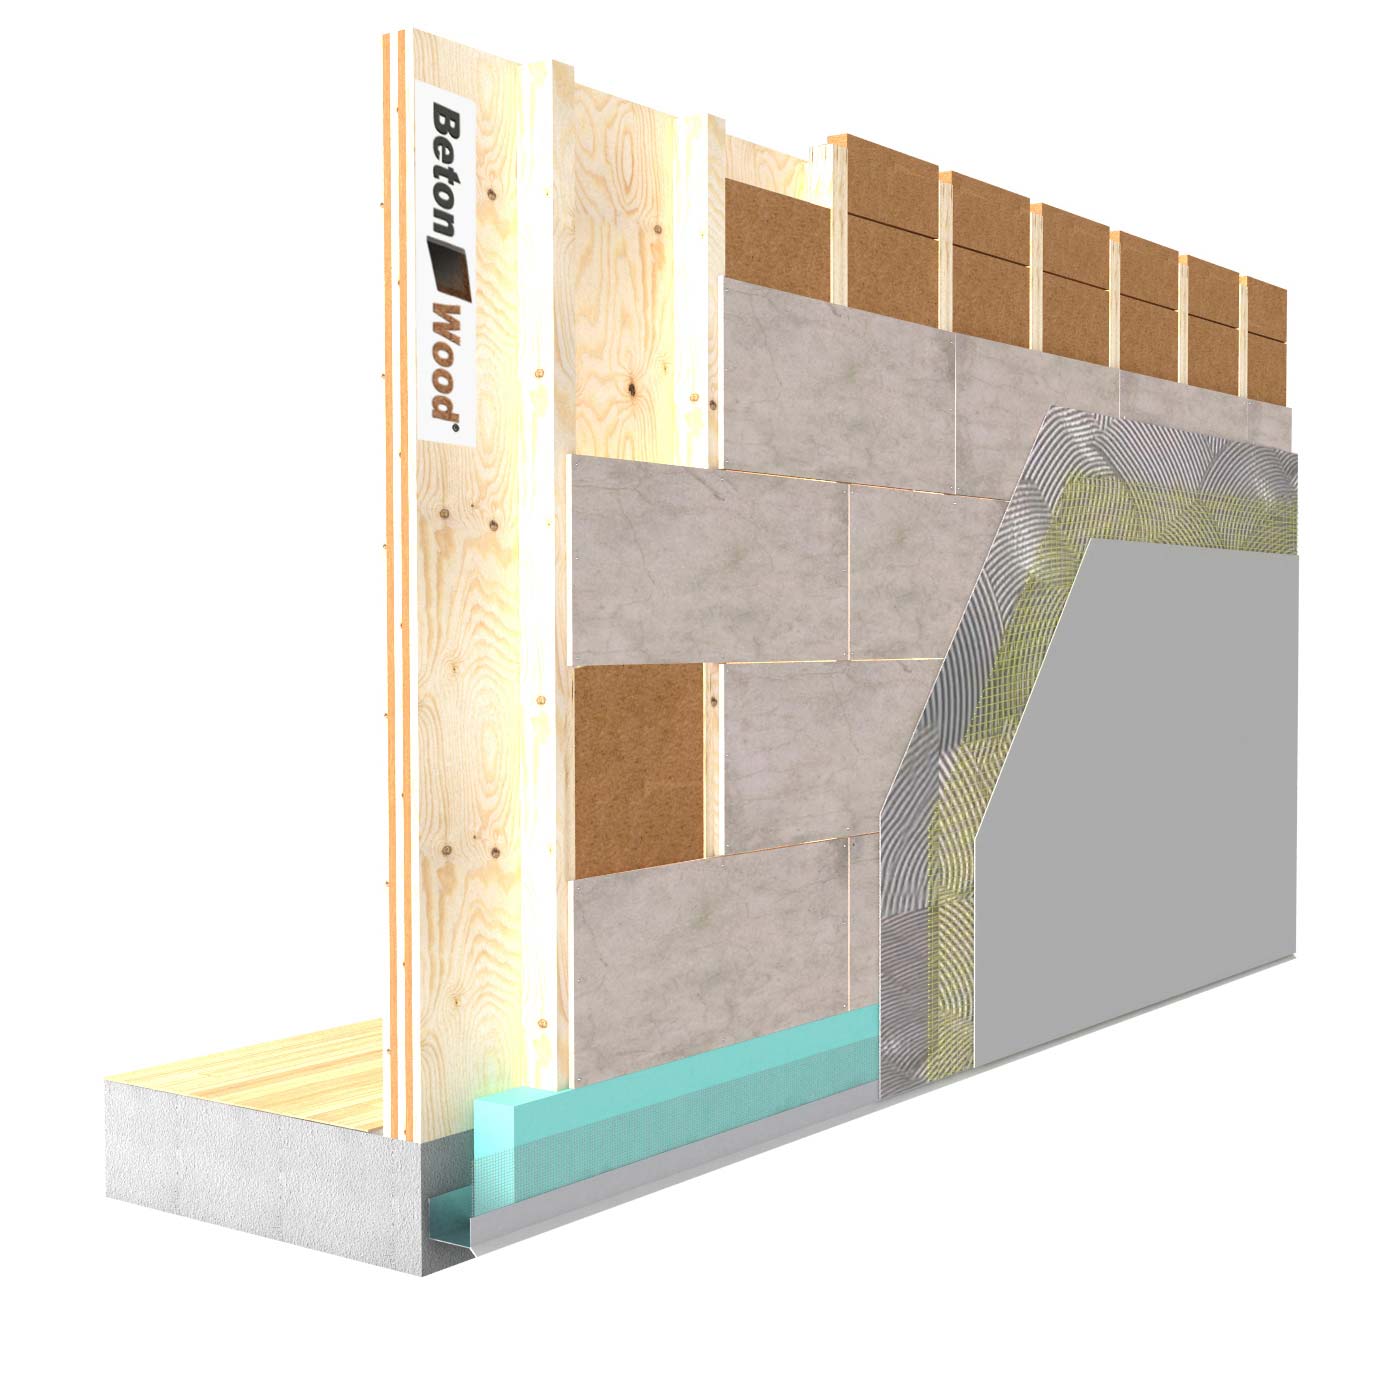 External insulation system with Therm SD wood fibre board on wooden walls